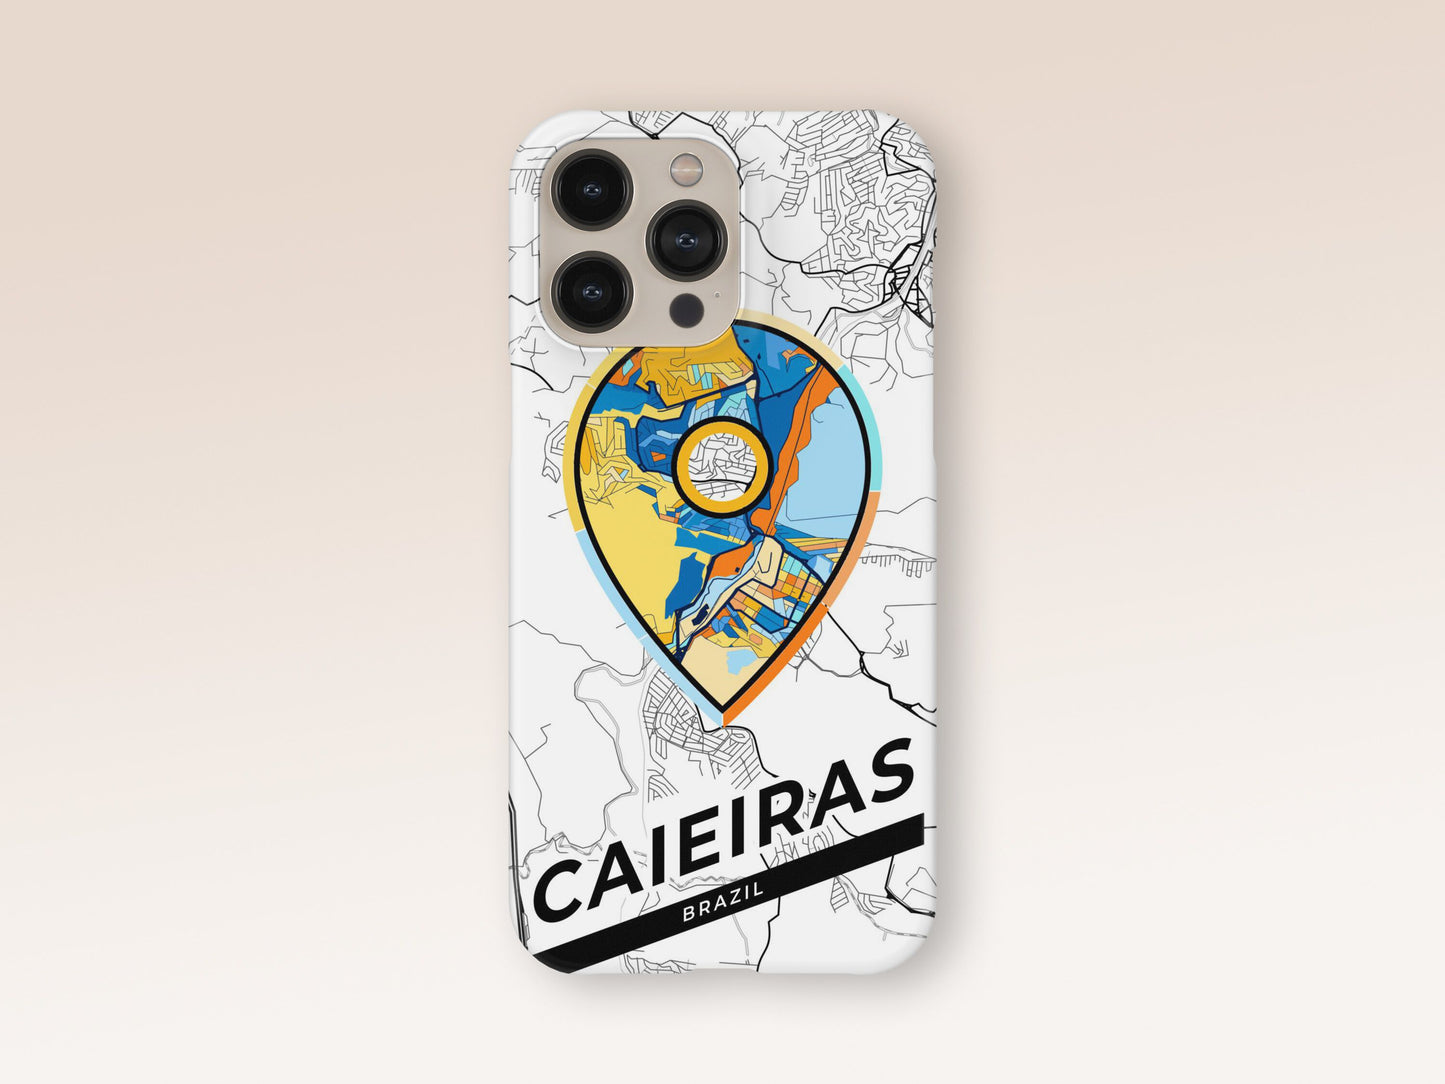 Caieiras Brazil slim phone case with colorful icon. Birthday, wedding or housewarming gift. Couple match cases. 1